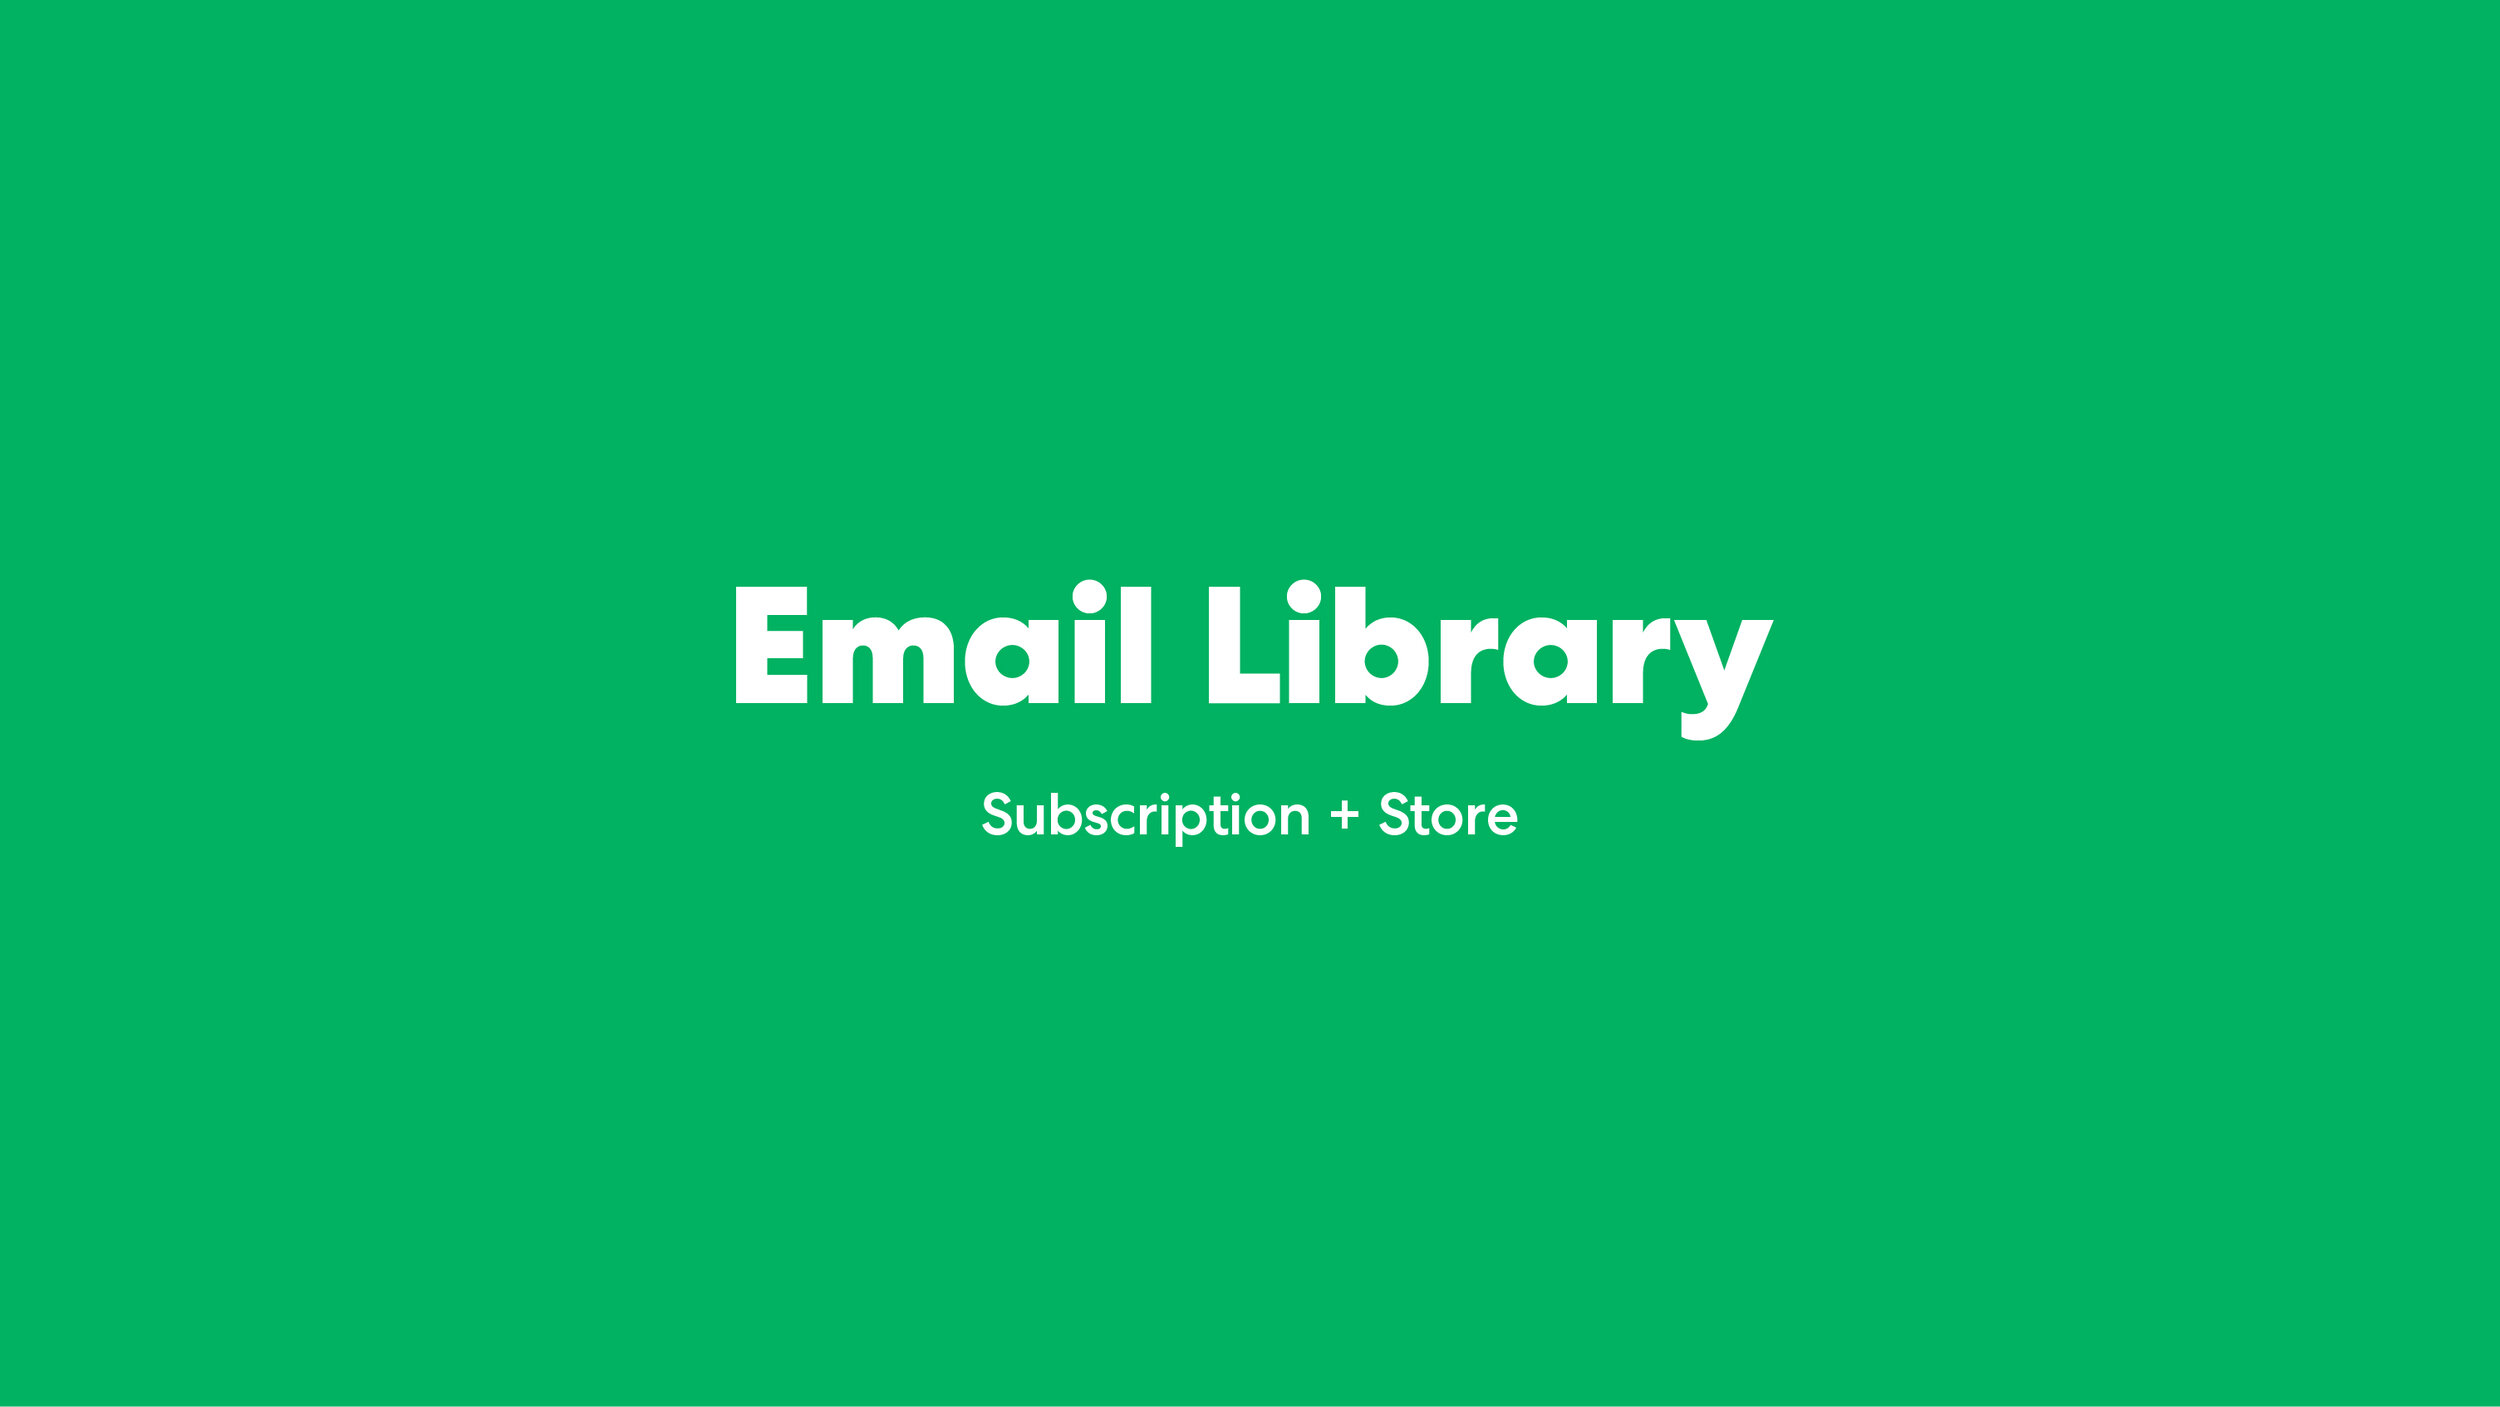 SUB_email asset library_1.jpg